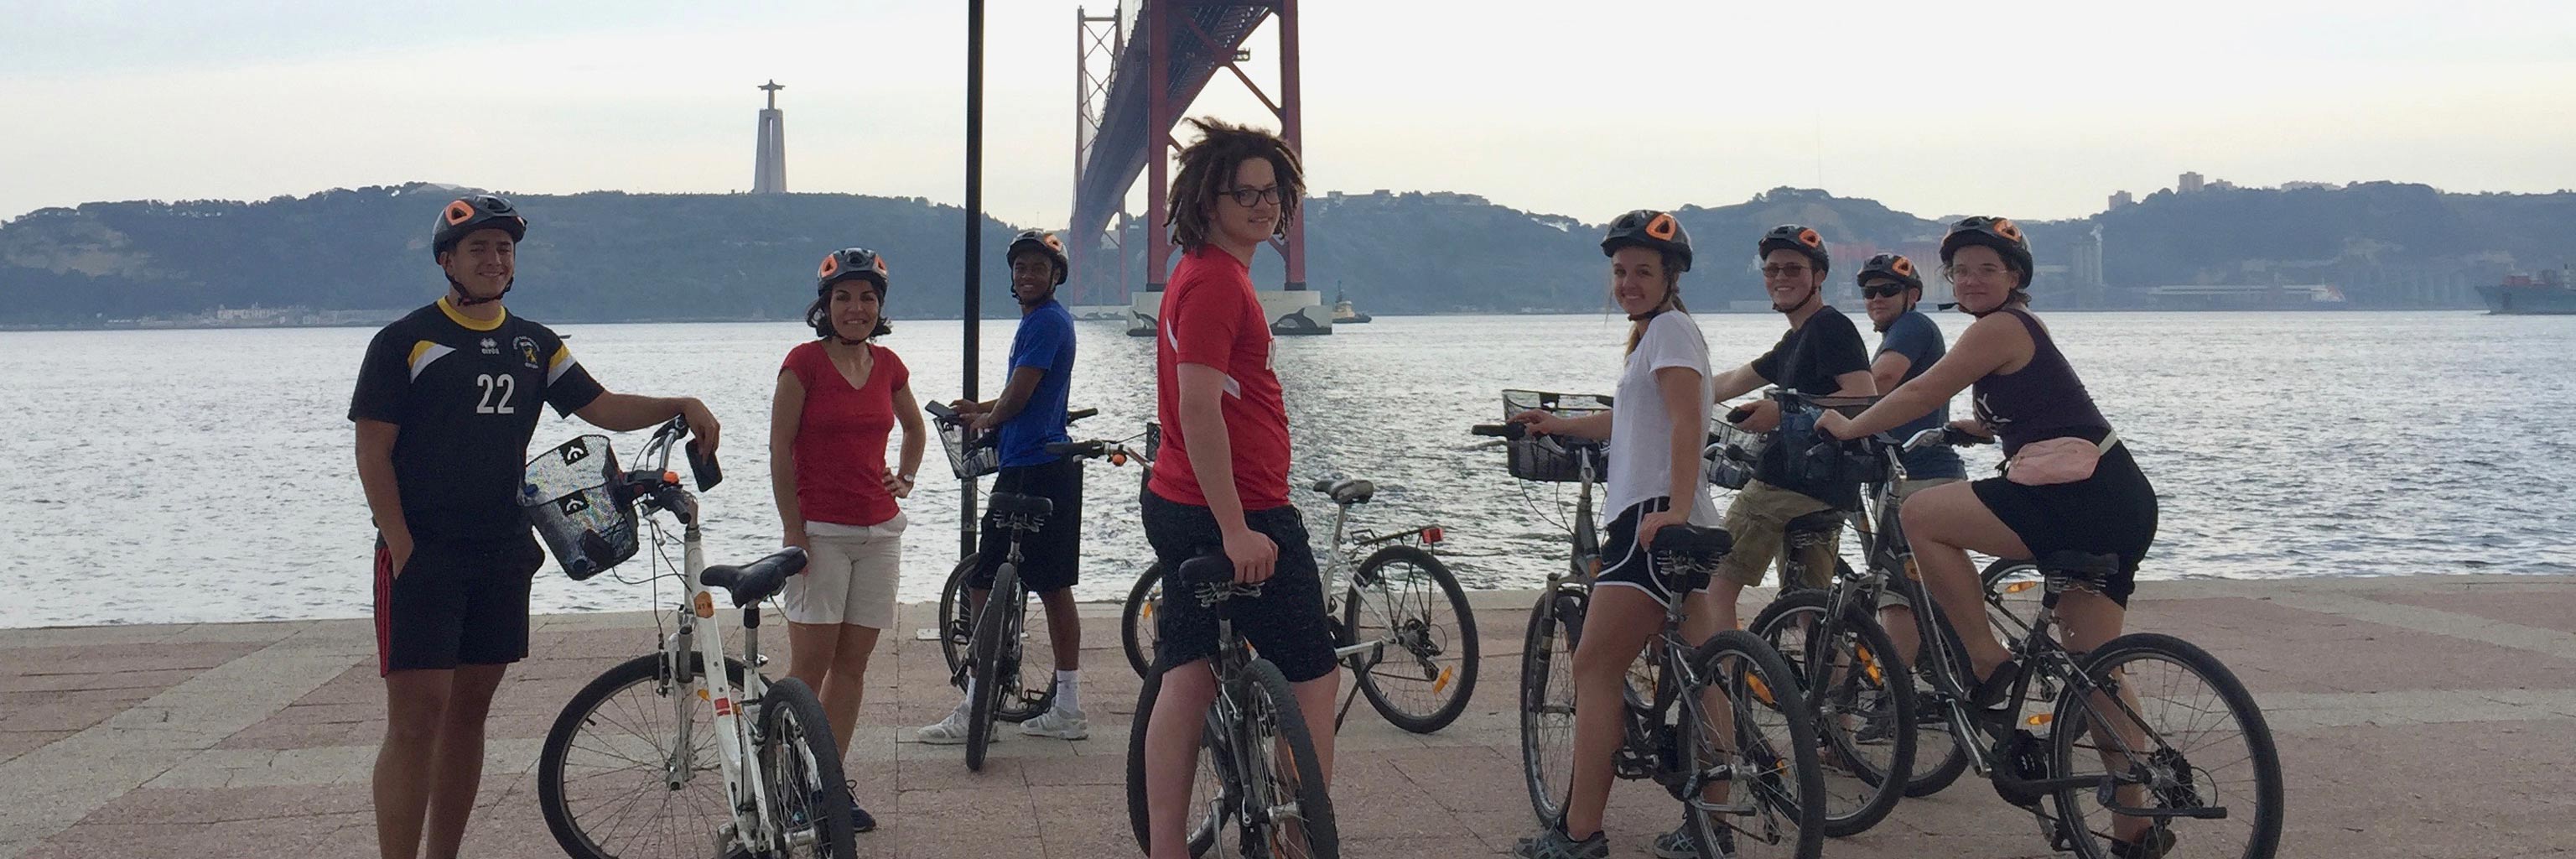 Students pose with their bikes on a waterfront 